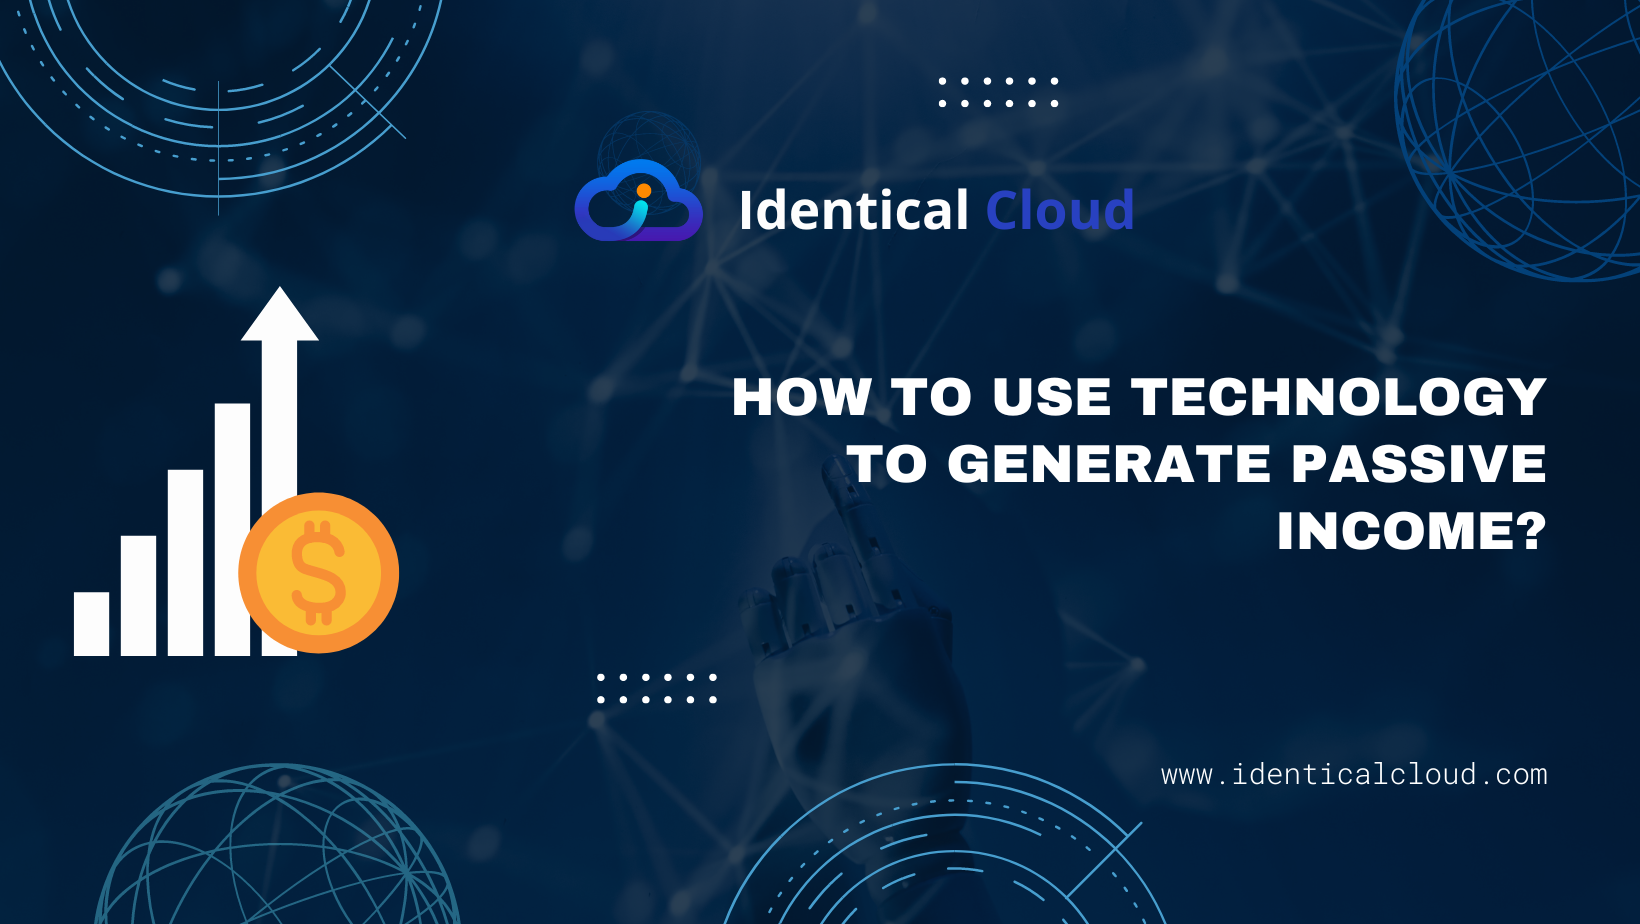 How to Use Technology to Generate Passive Income? - identicalcloud.com